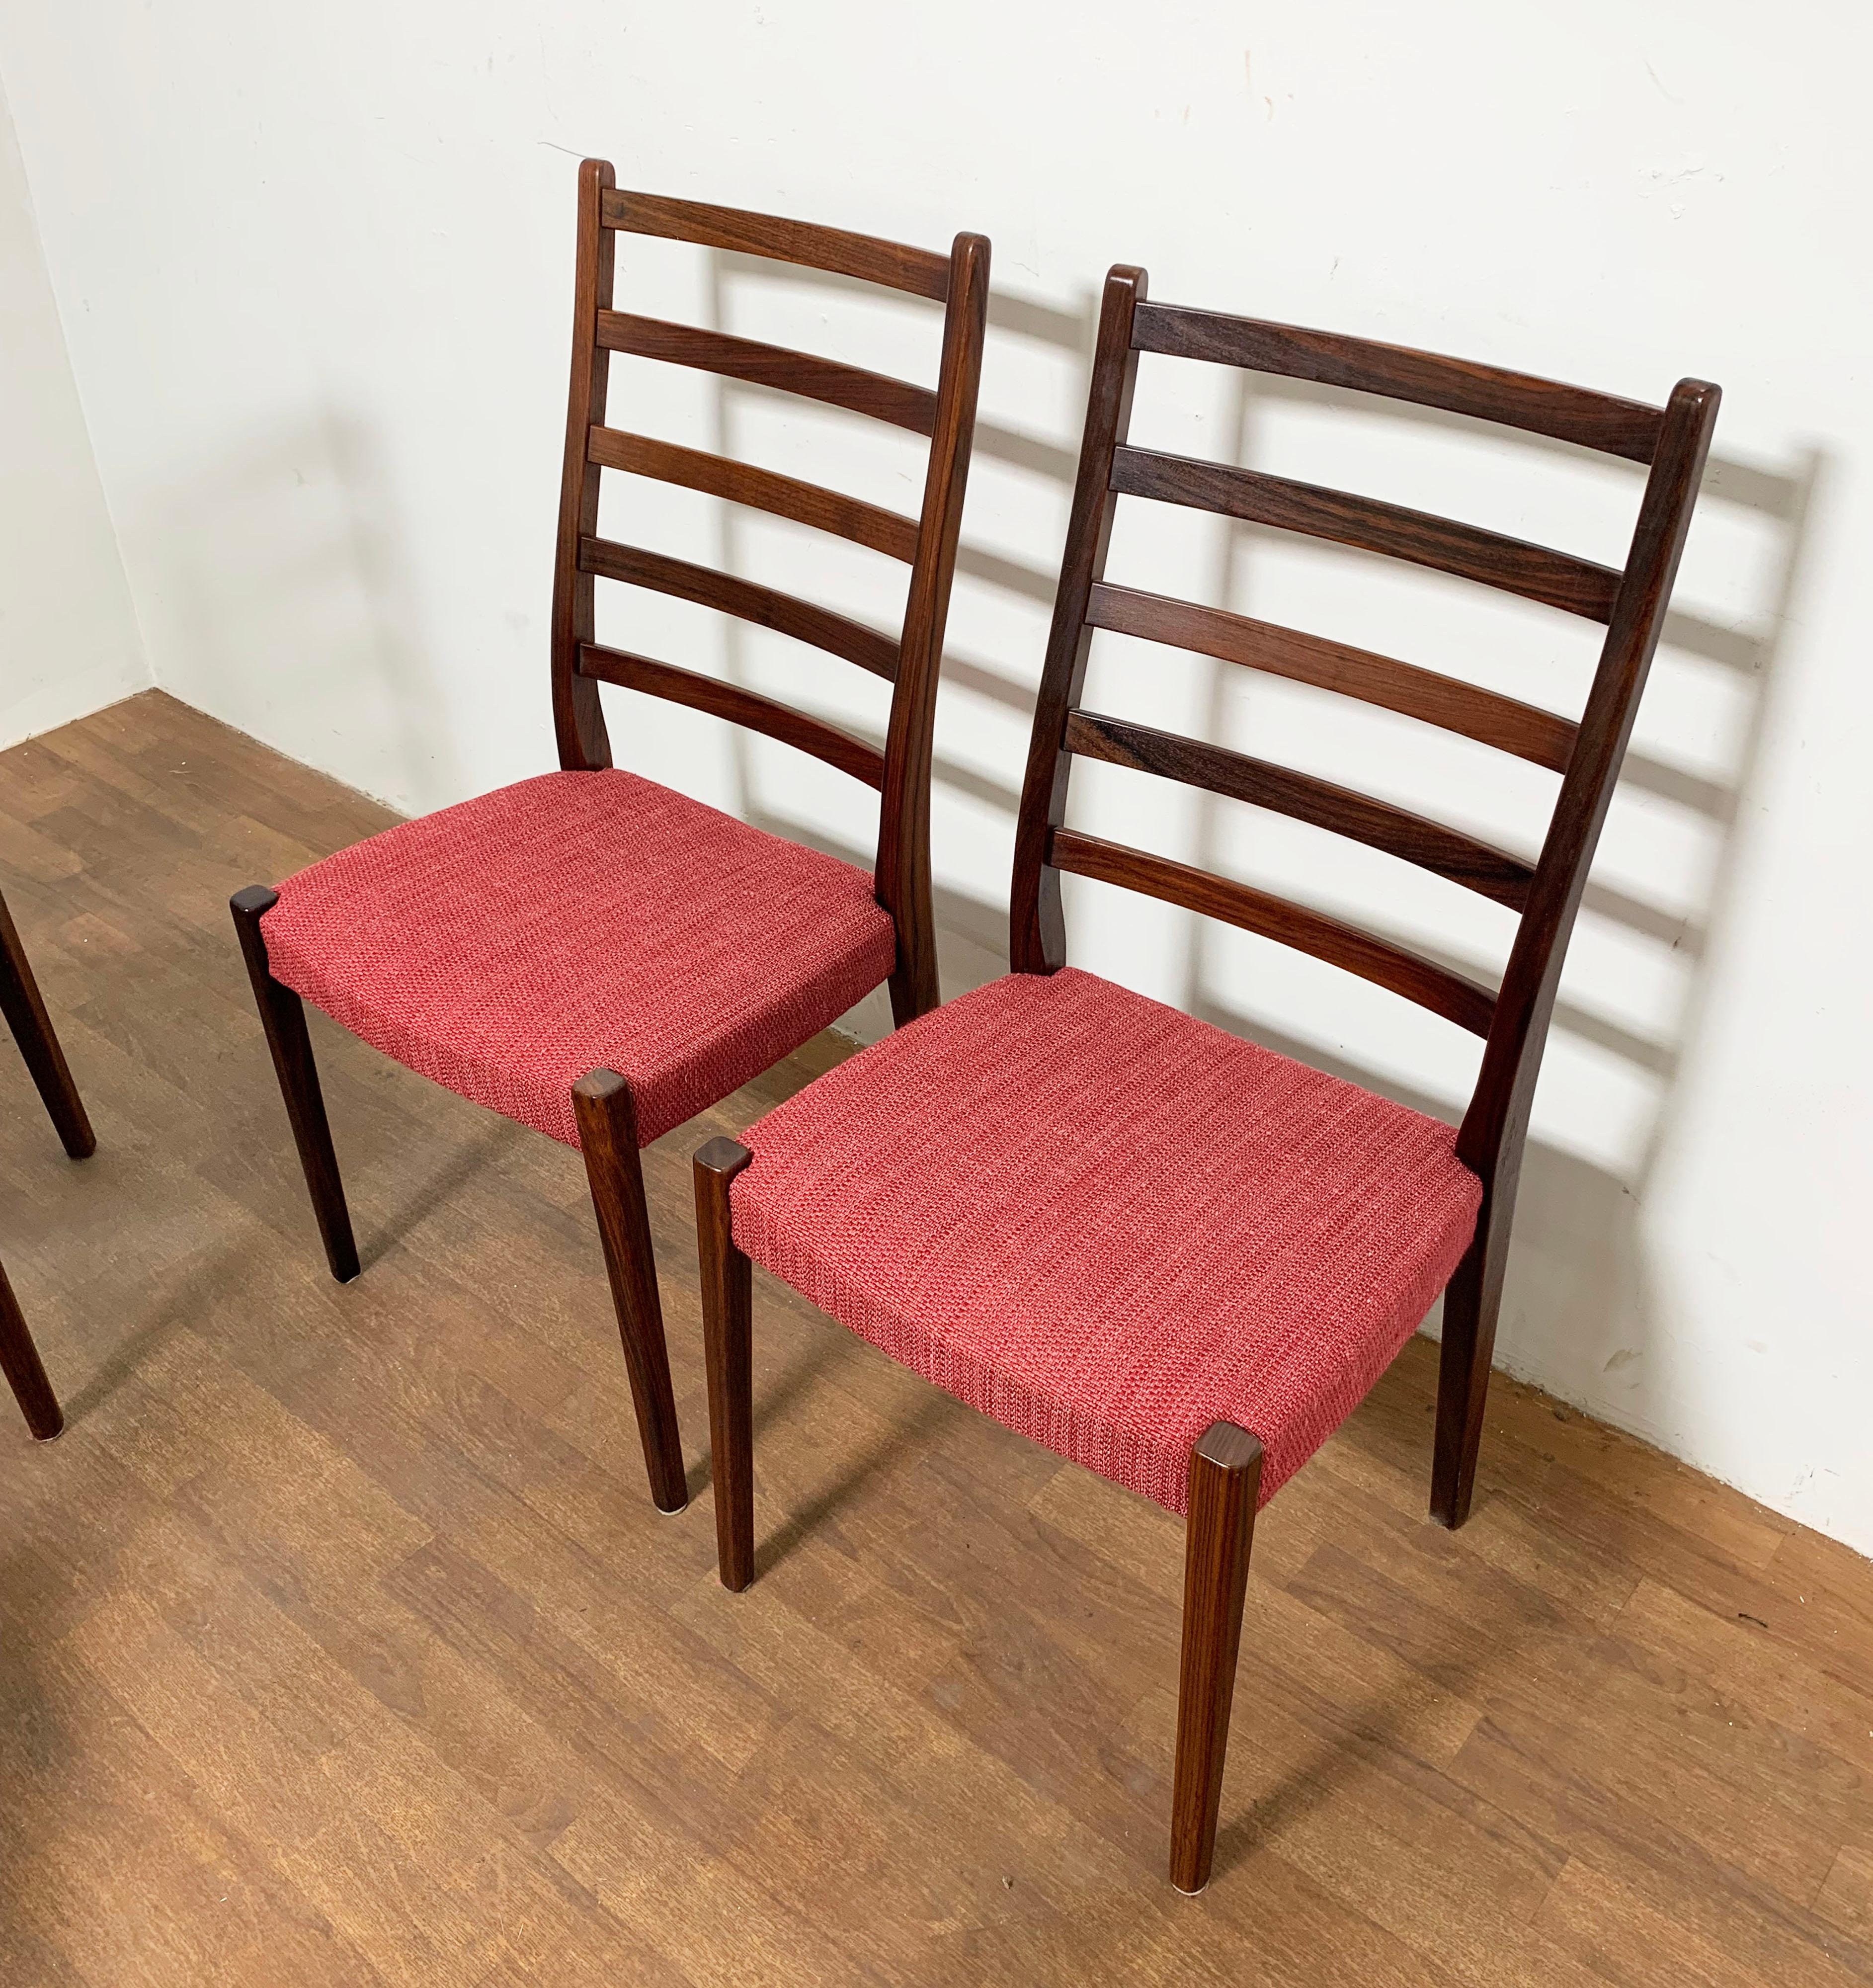 Set of six elegant ladder back dining chairs in rosewood  by Svegards of Markaryd, made in Sweden, circa 1970s.